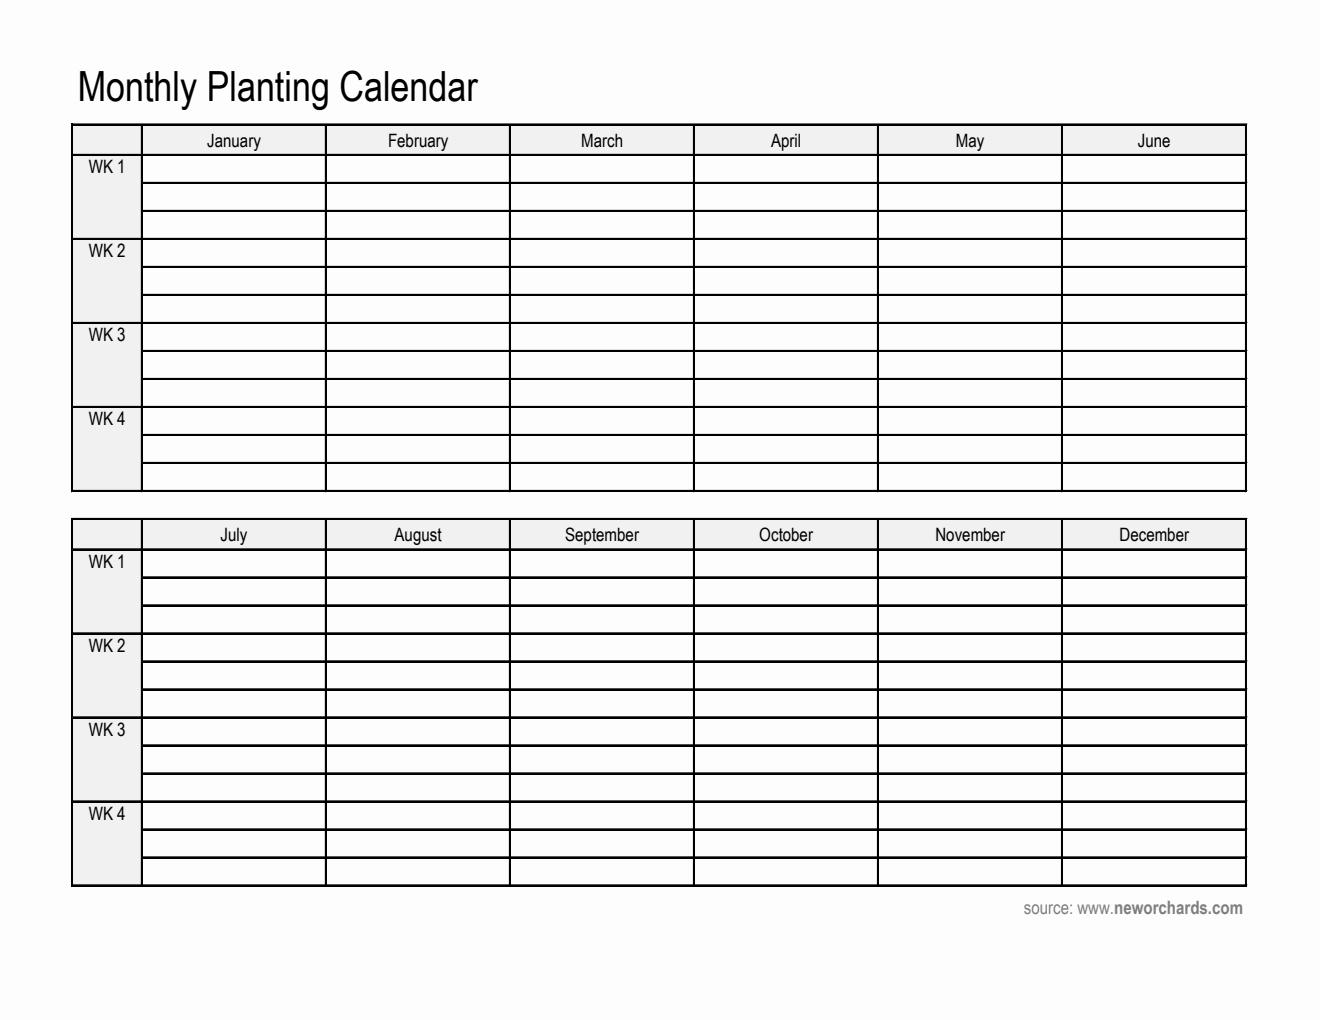  Monthly Planting Calendar in Excel